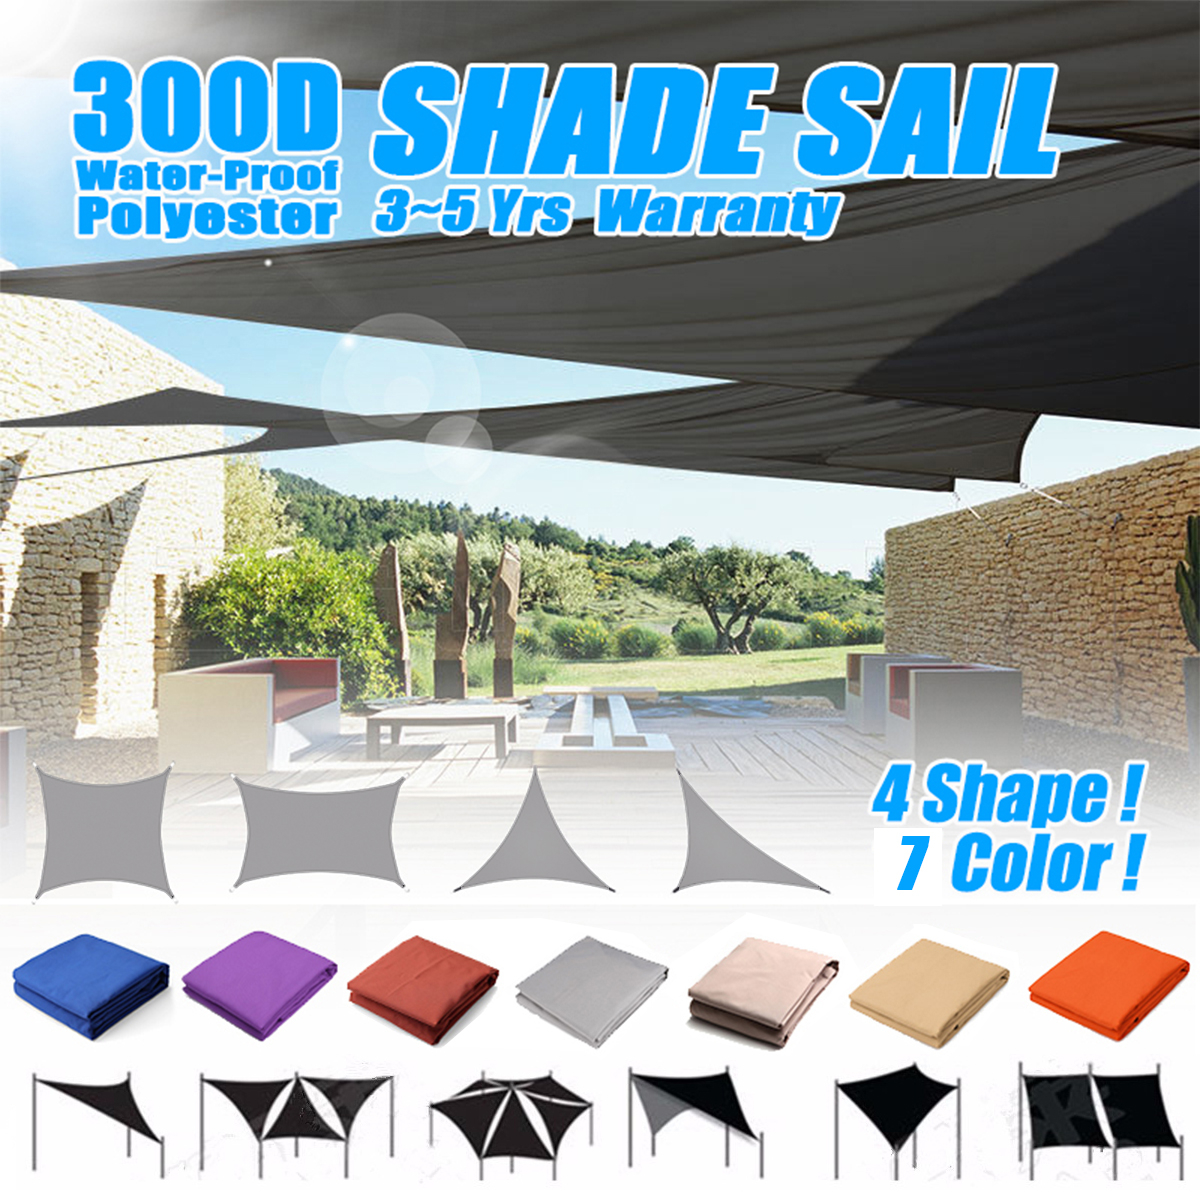 Details About 300d Sun Shade Sail Outdoor Garden Waterproof Awning Canopy Patio Cover Uv Block in size 1200 X 1200